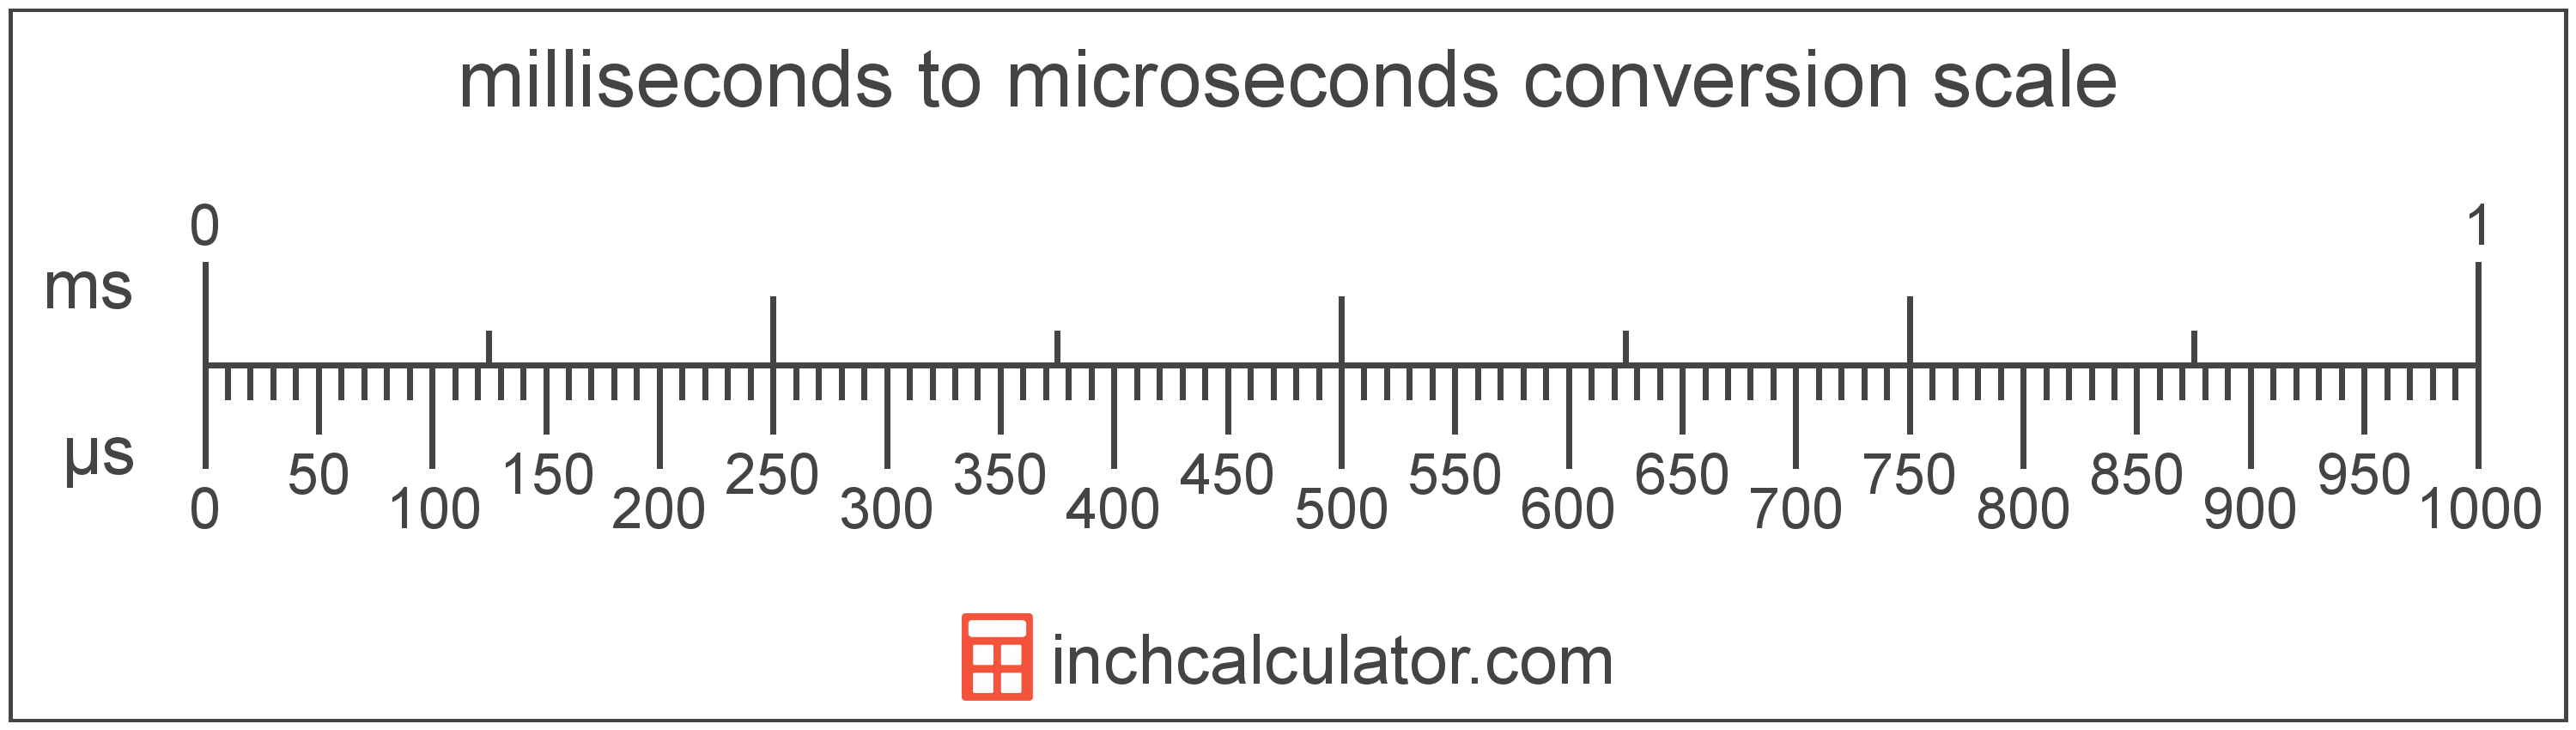 conversion scale showing microseconds and equivalent milliseconds time values